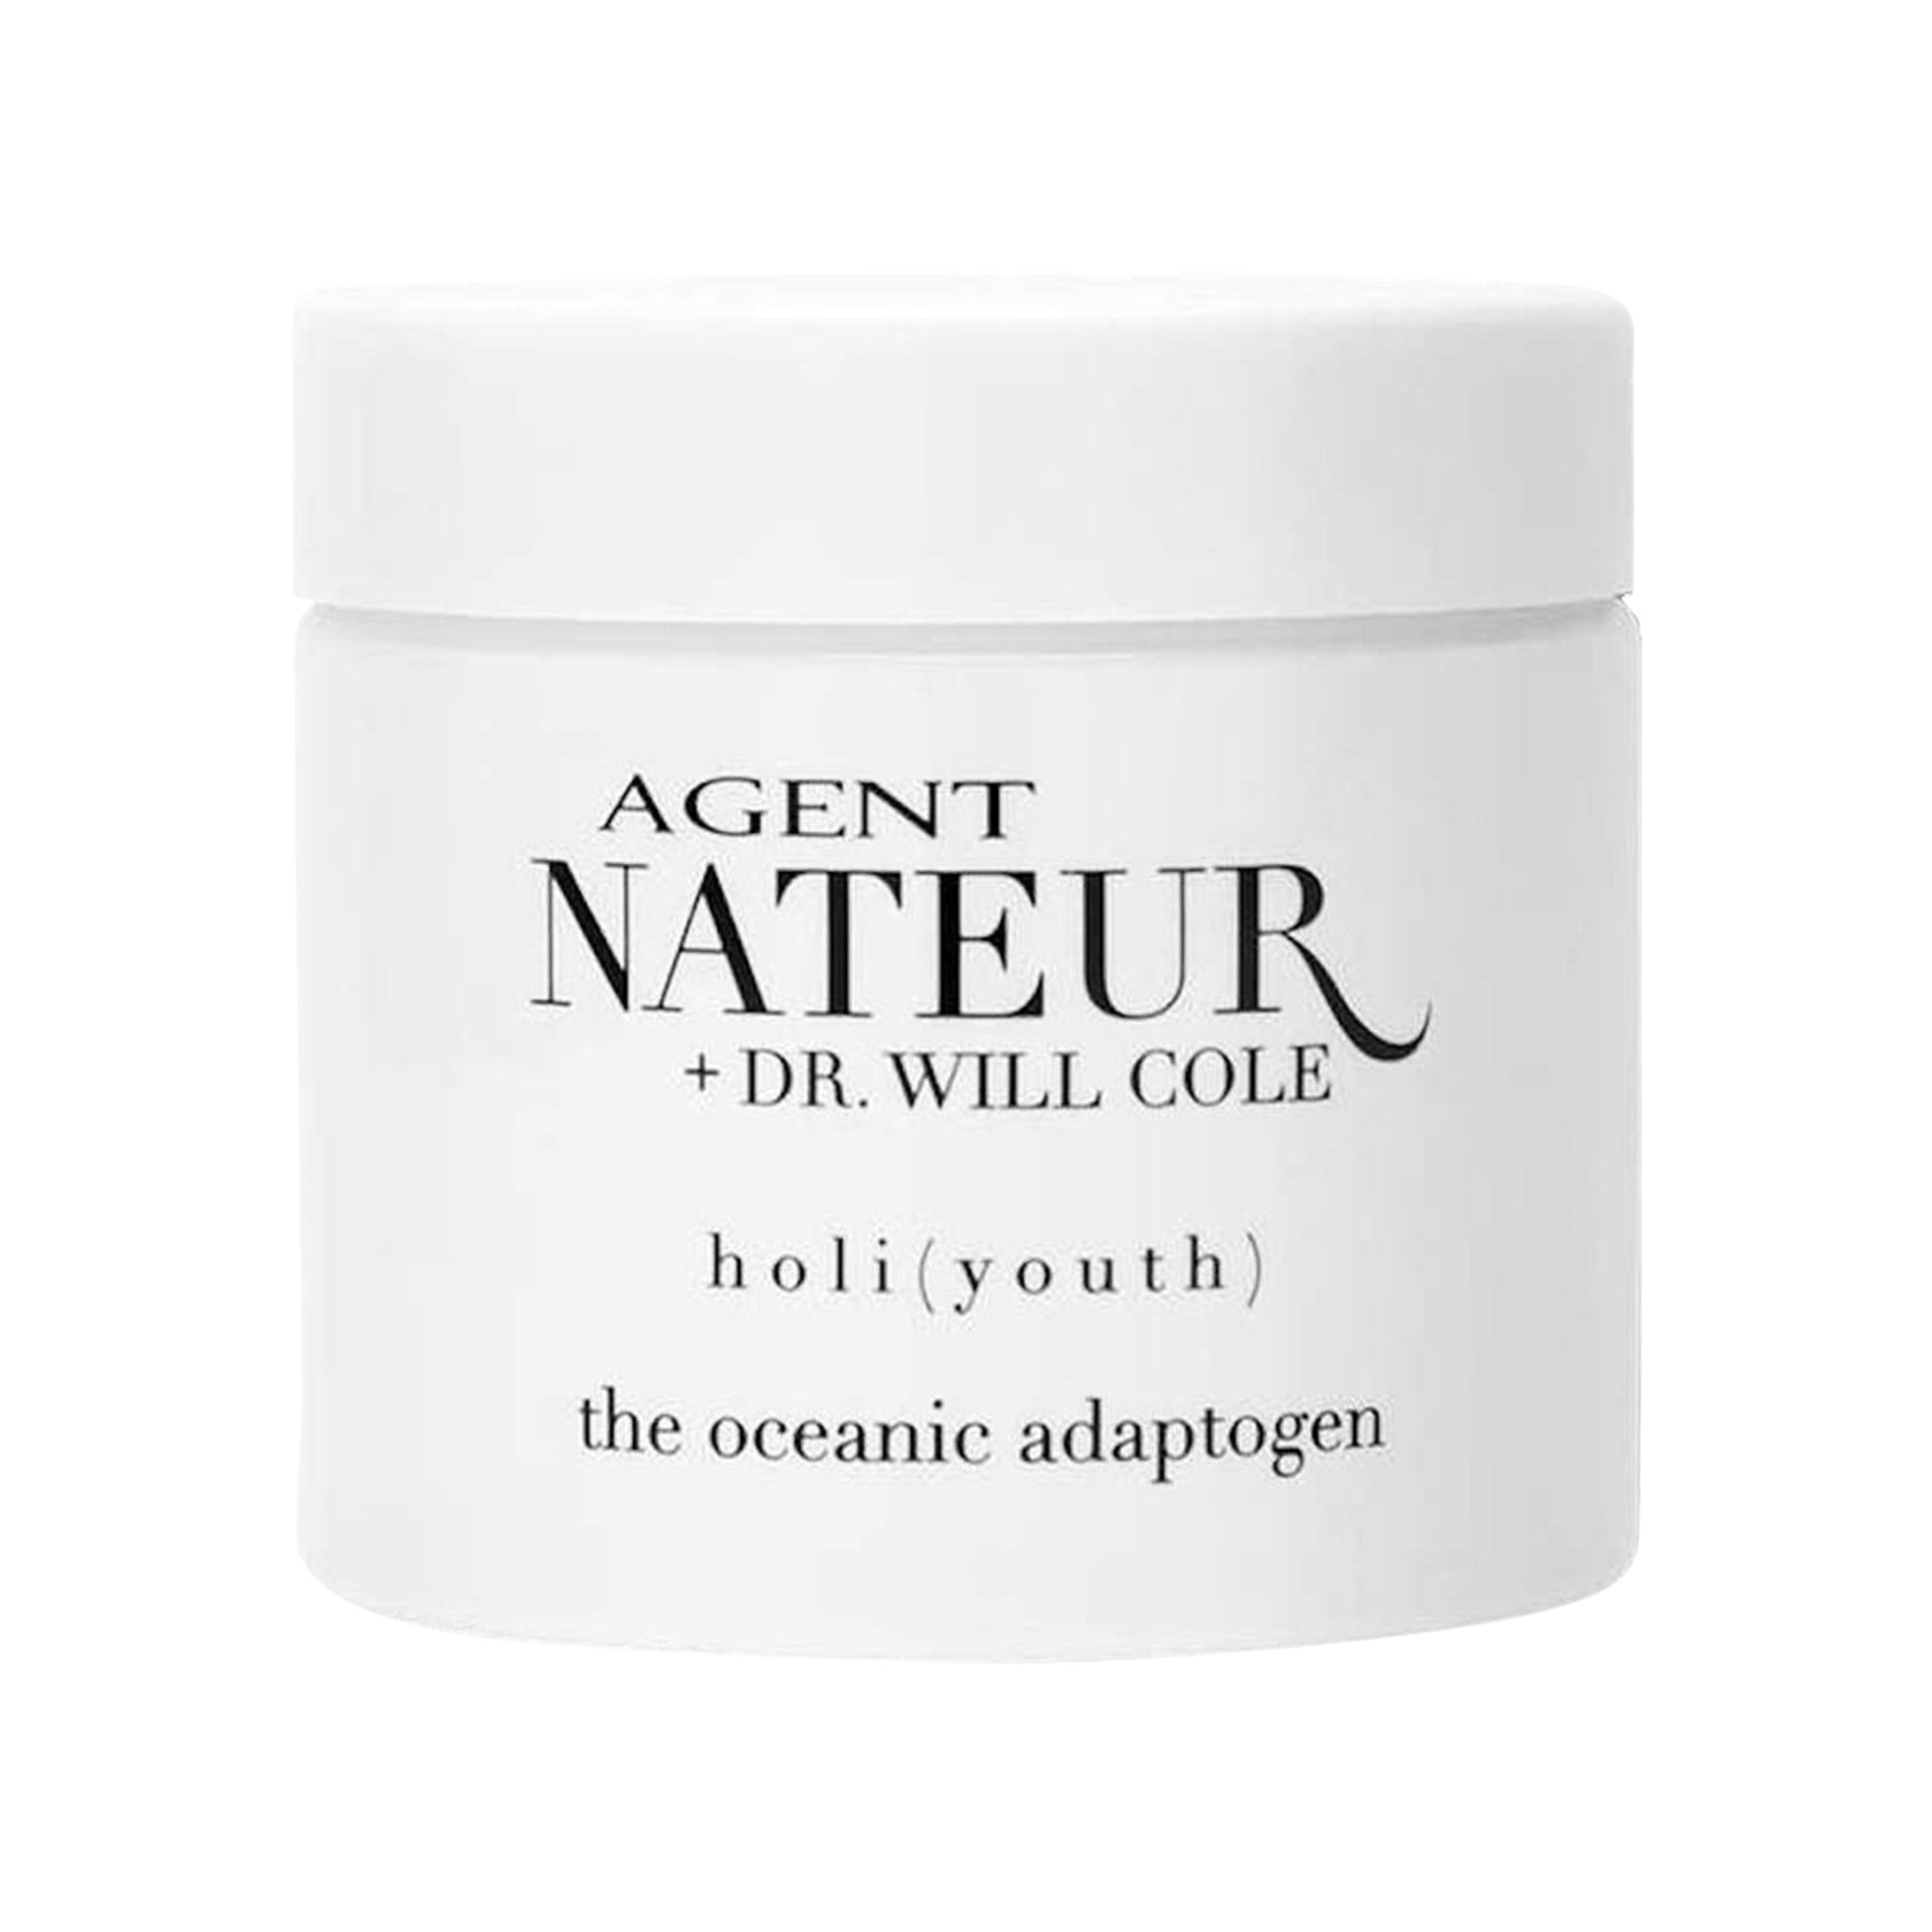 Agent Nateur Holi (Youth) The Oceanic Adaptogen main image.